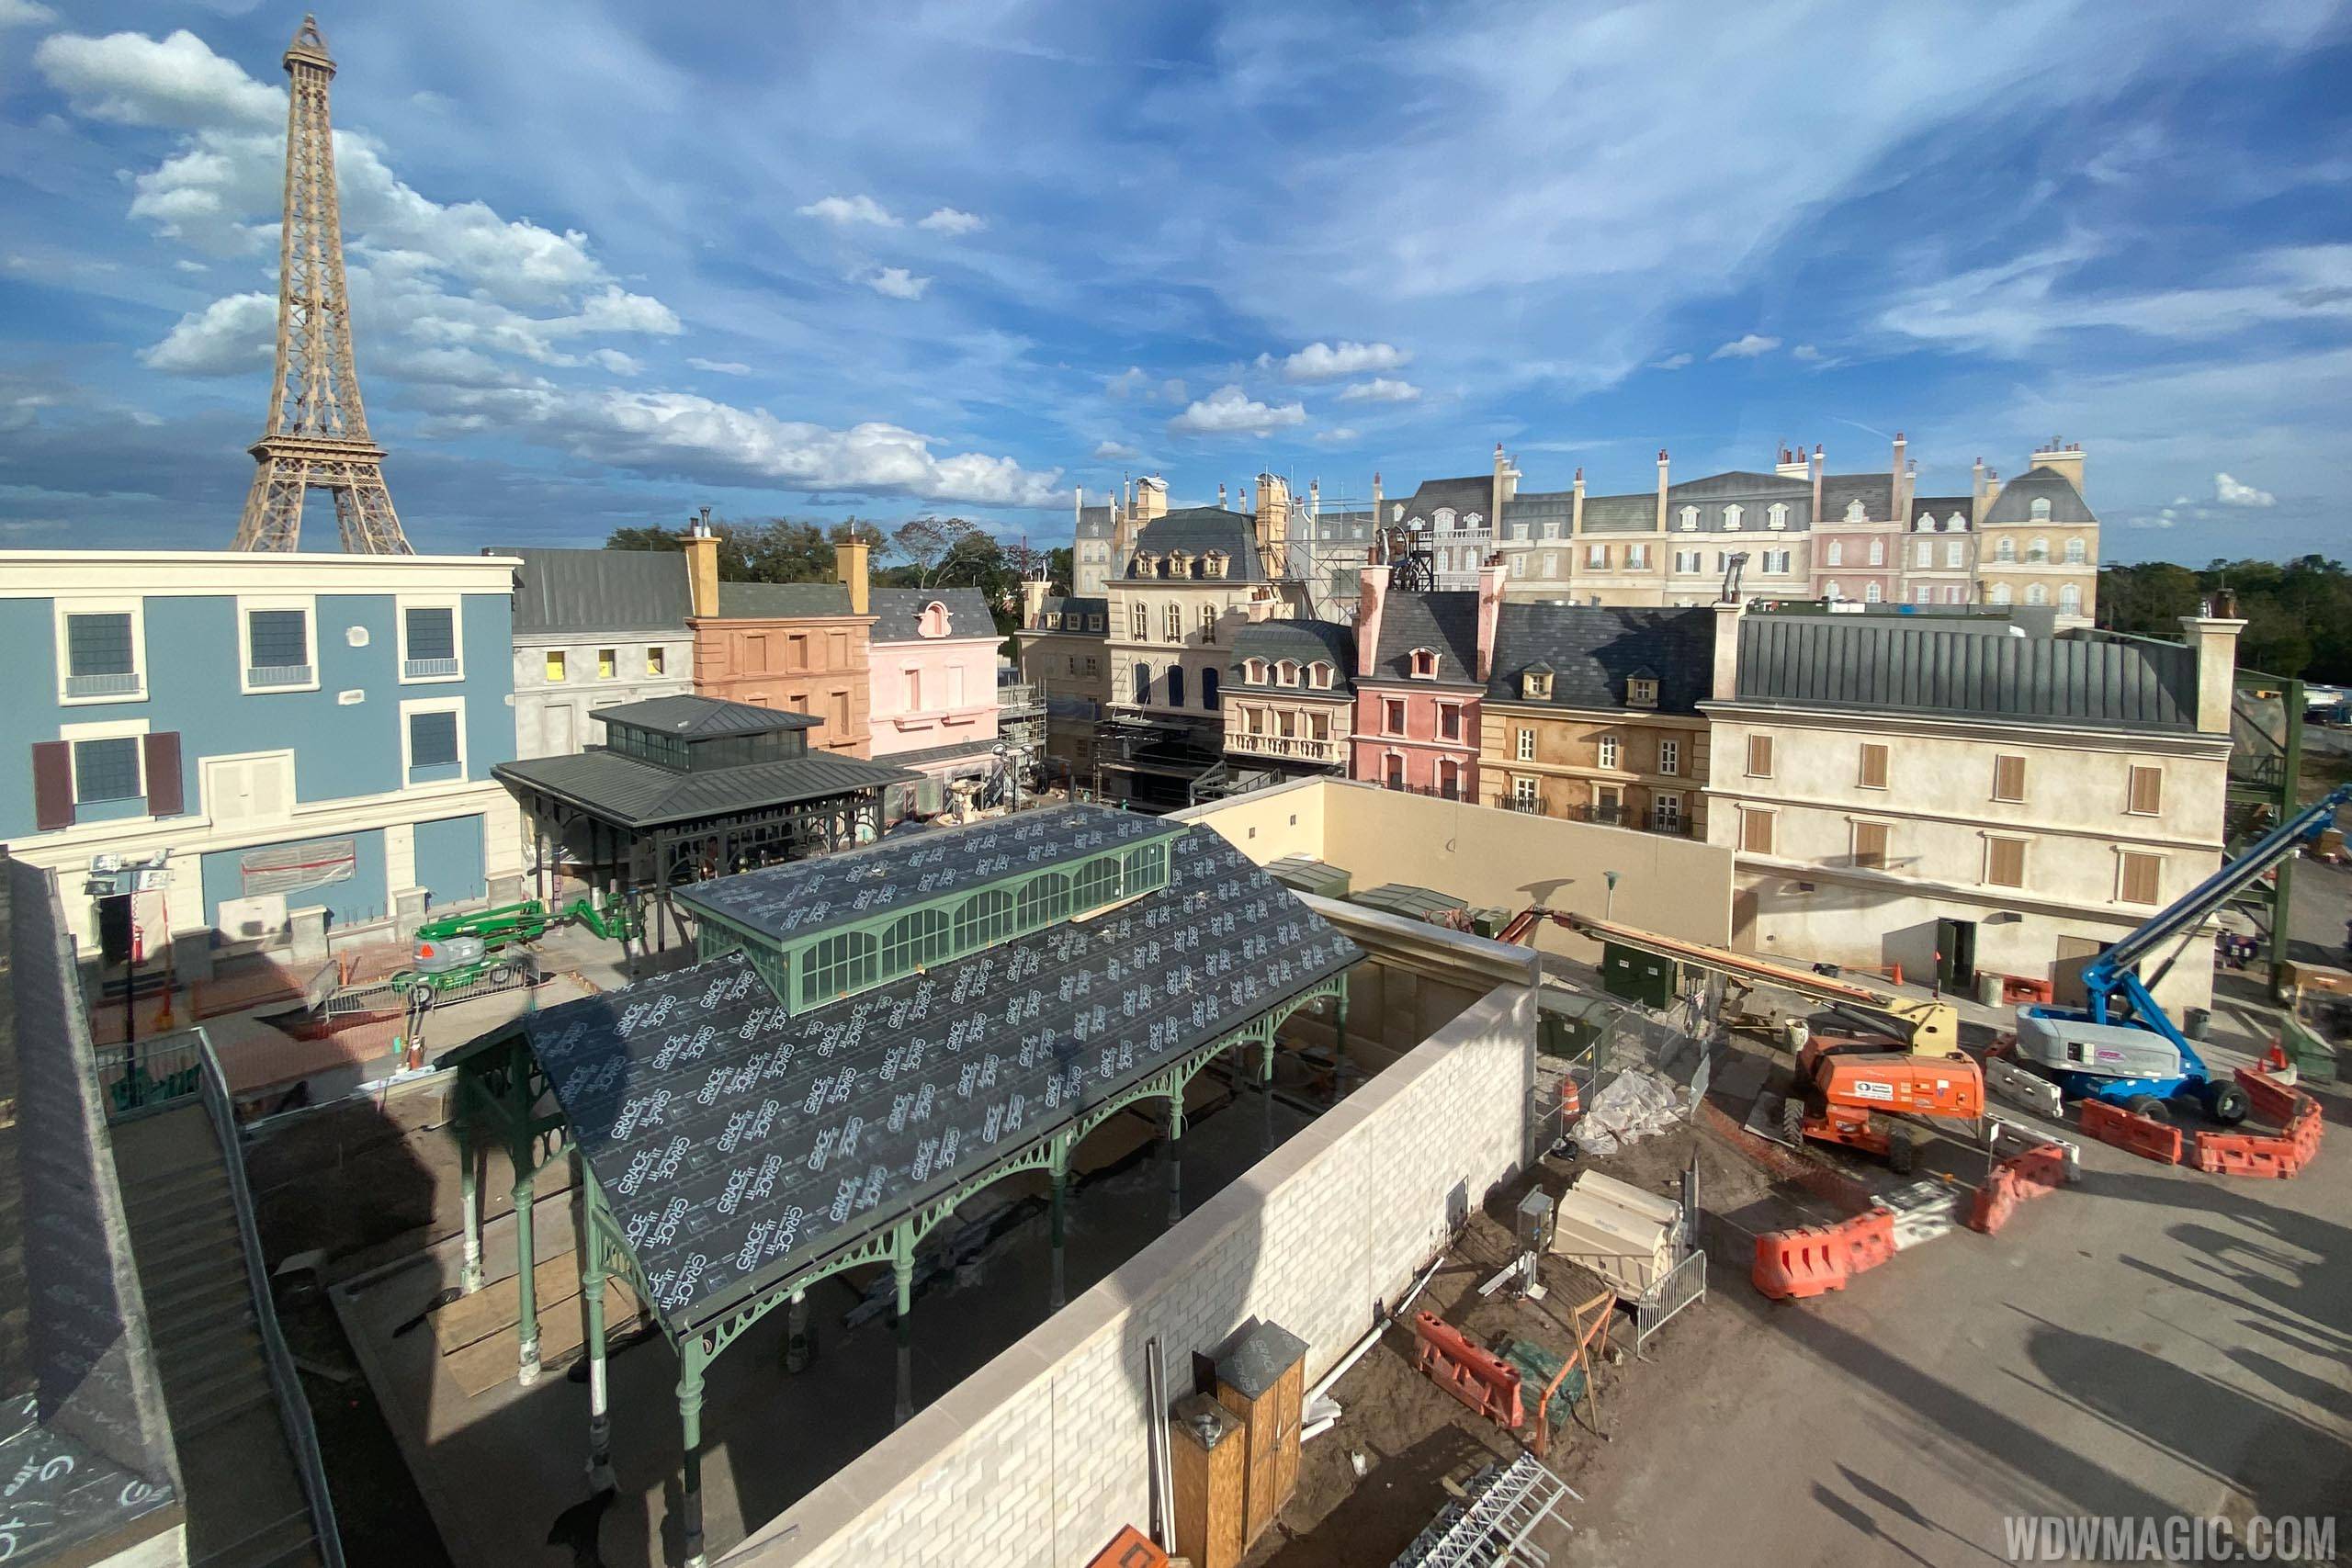 PHOTOS - Work is moving quickly at Remy's Ratatouille Adventure in Epcot's France pavilion